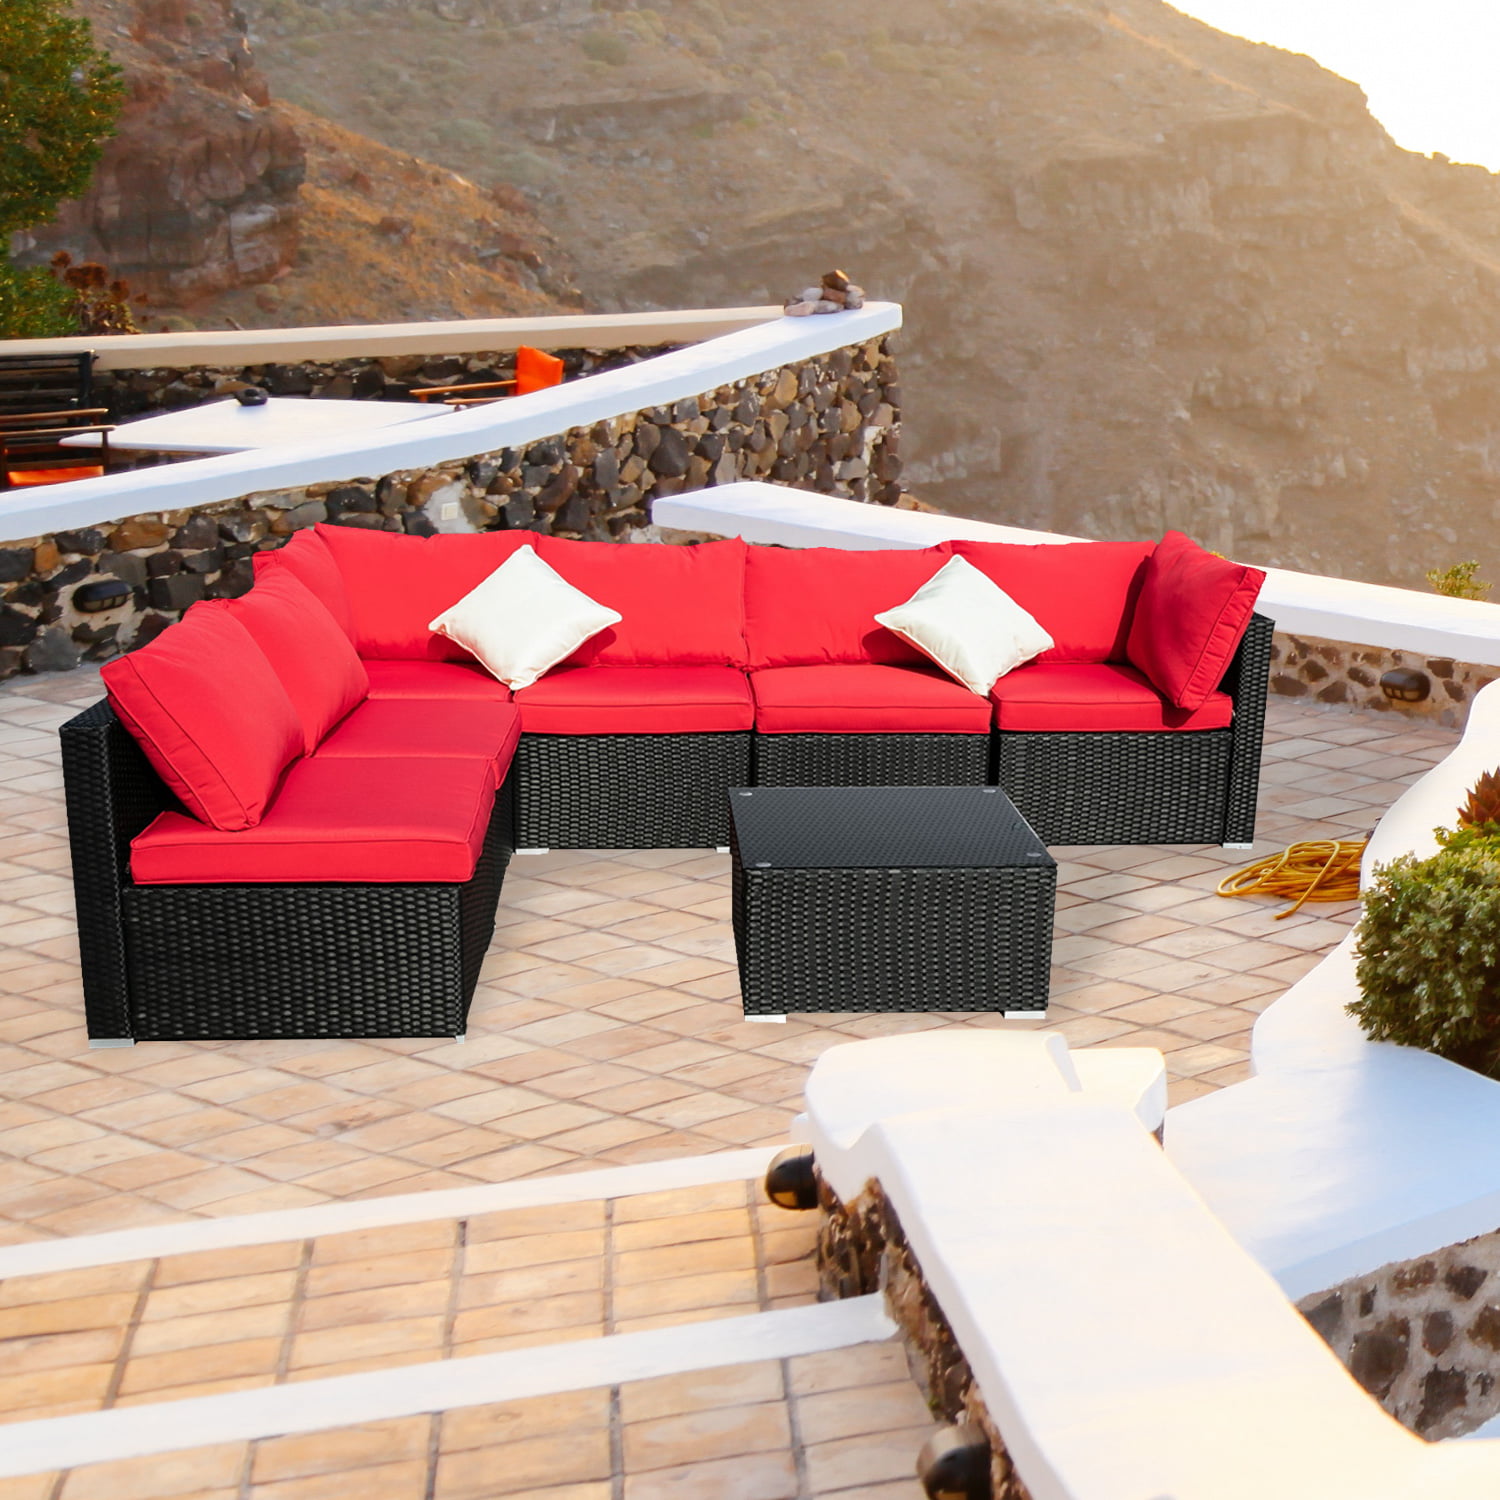 Wholesale Outdoor Furniture: How To Find Quality Pieces At Affordable Prices